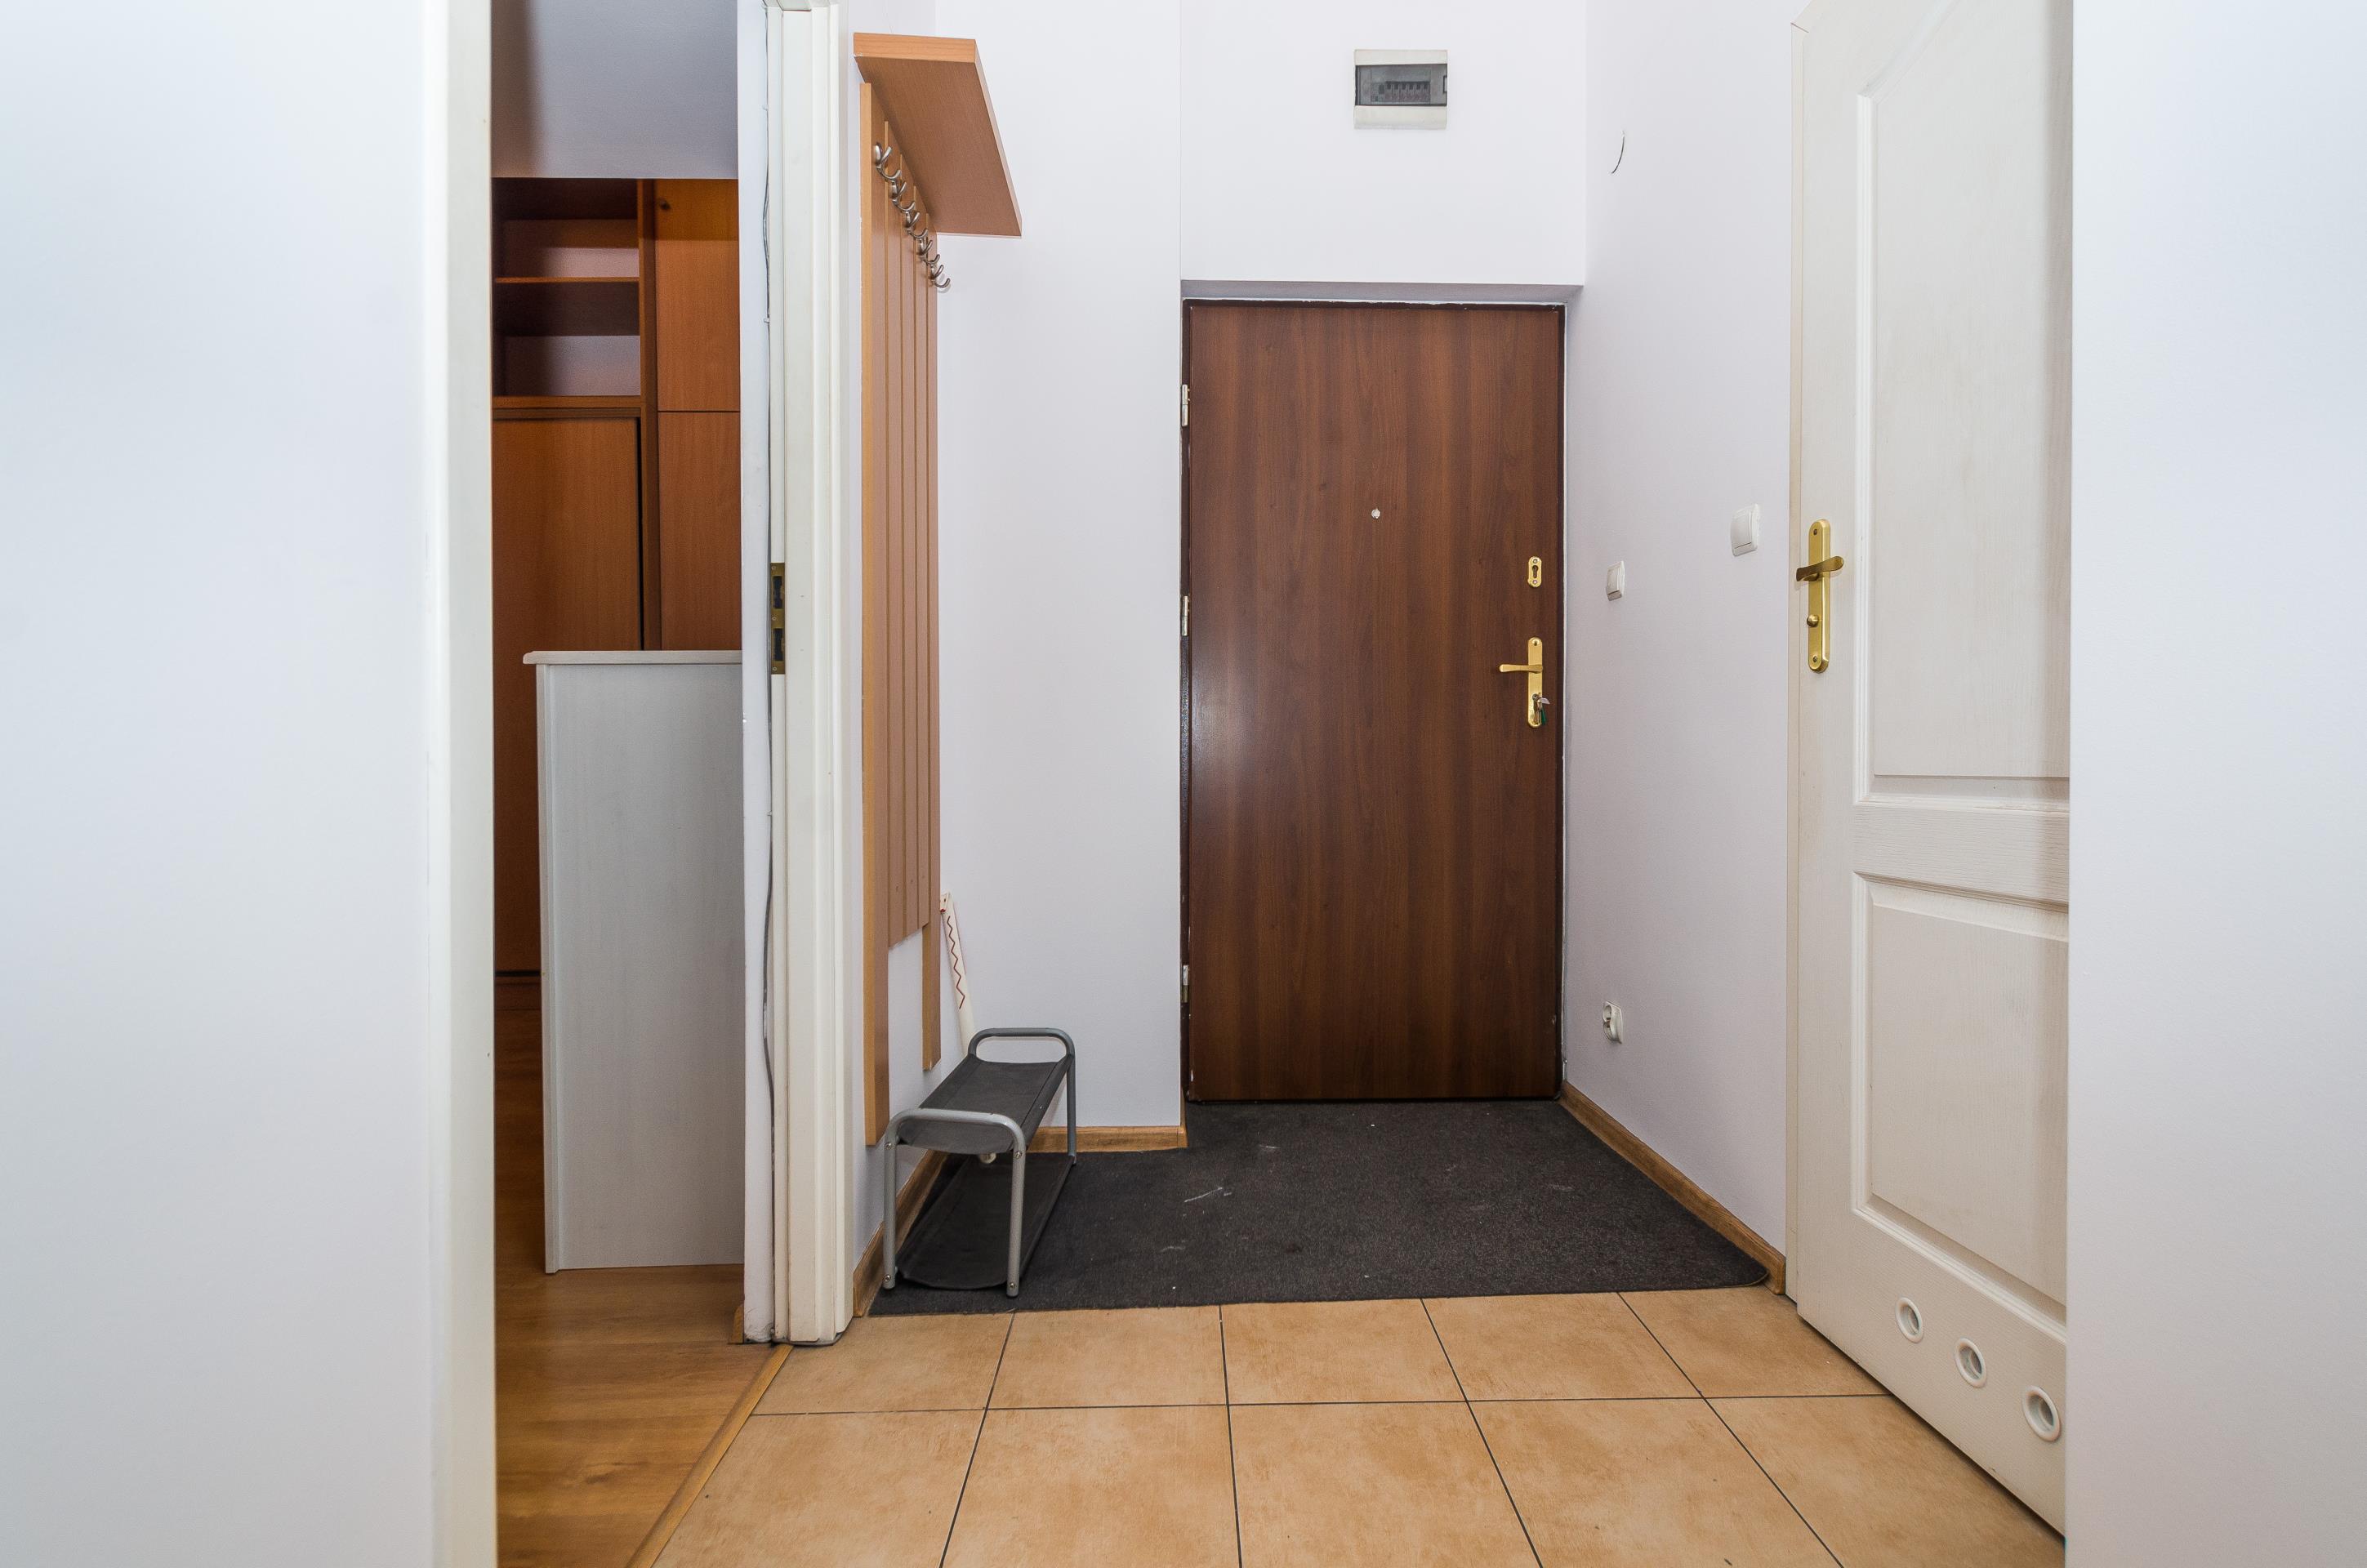 1-bedroom apartment in the heart of Kazimierz district.